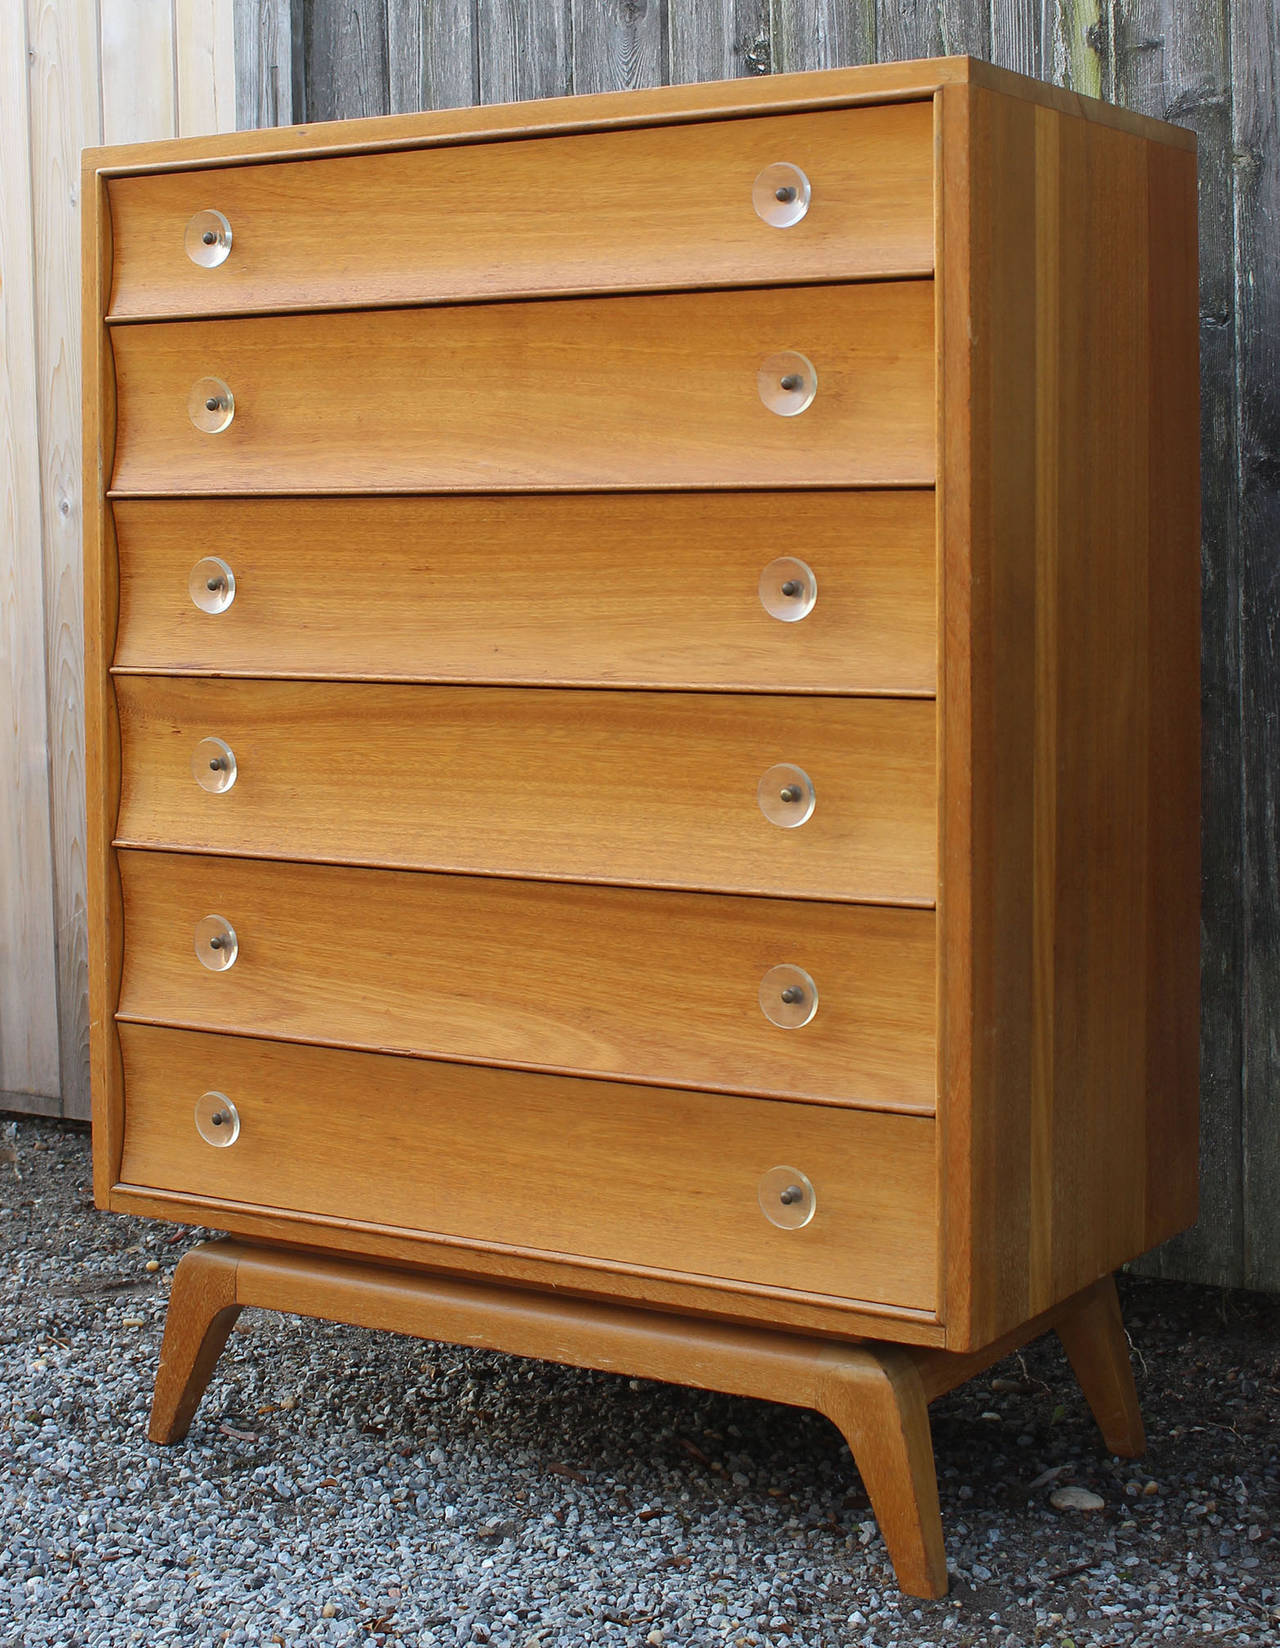 A blonde wood dresser with clear lucite pulls and brass hardware by Paul Frankl for Brown Saltman (labelled verso).

complementary delivery within 30 miles.